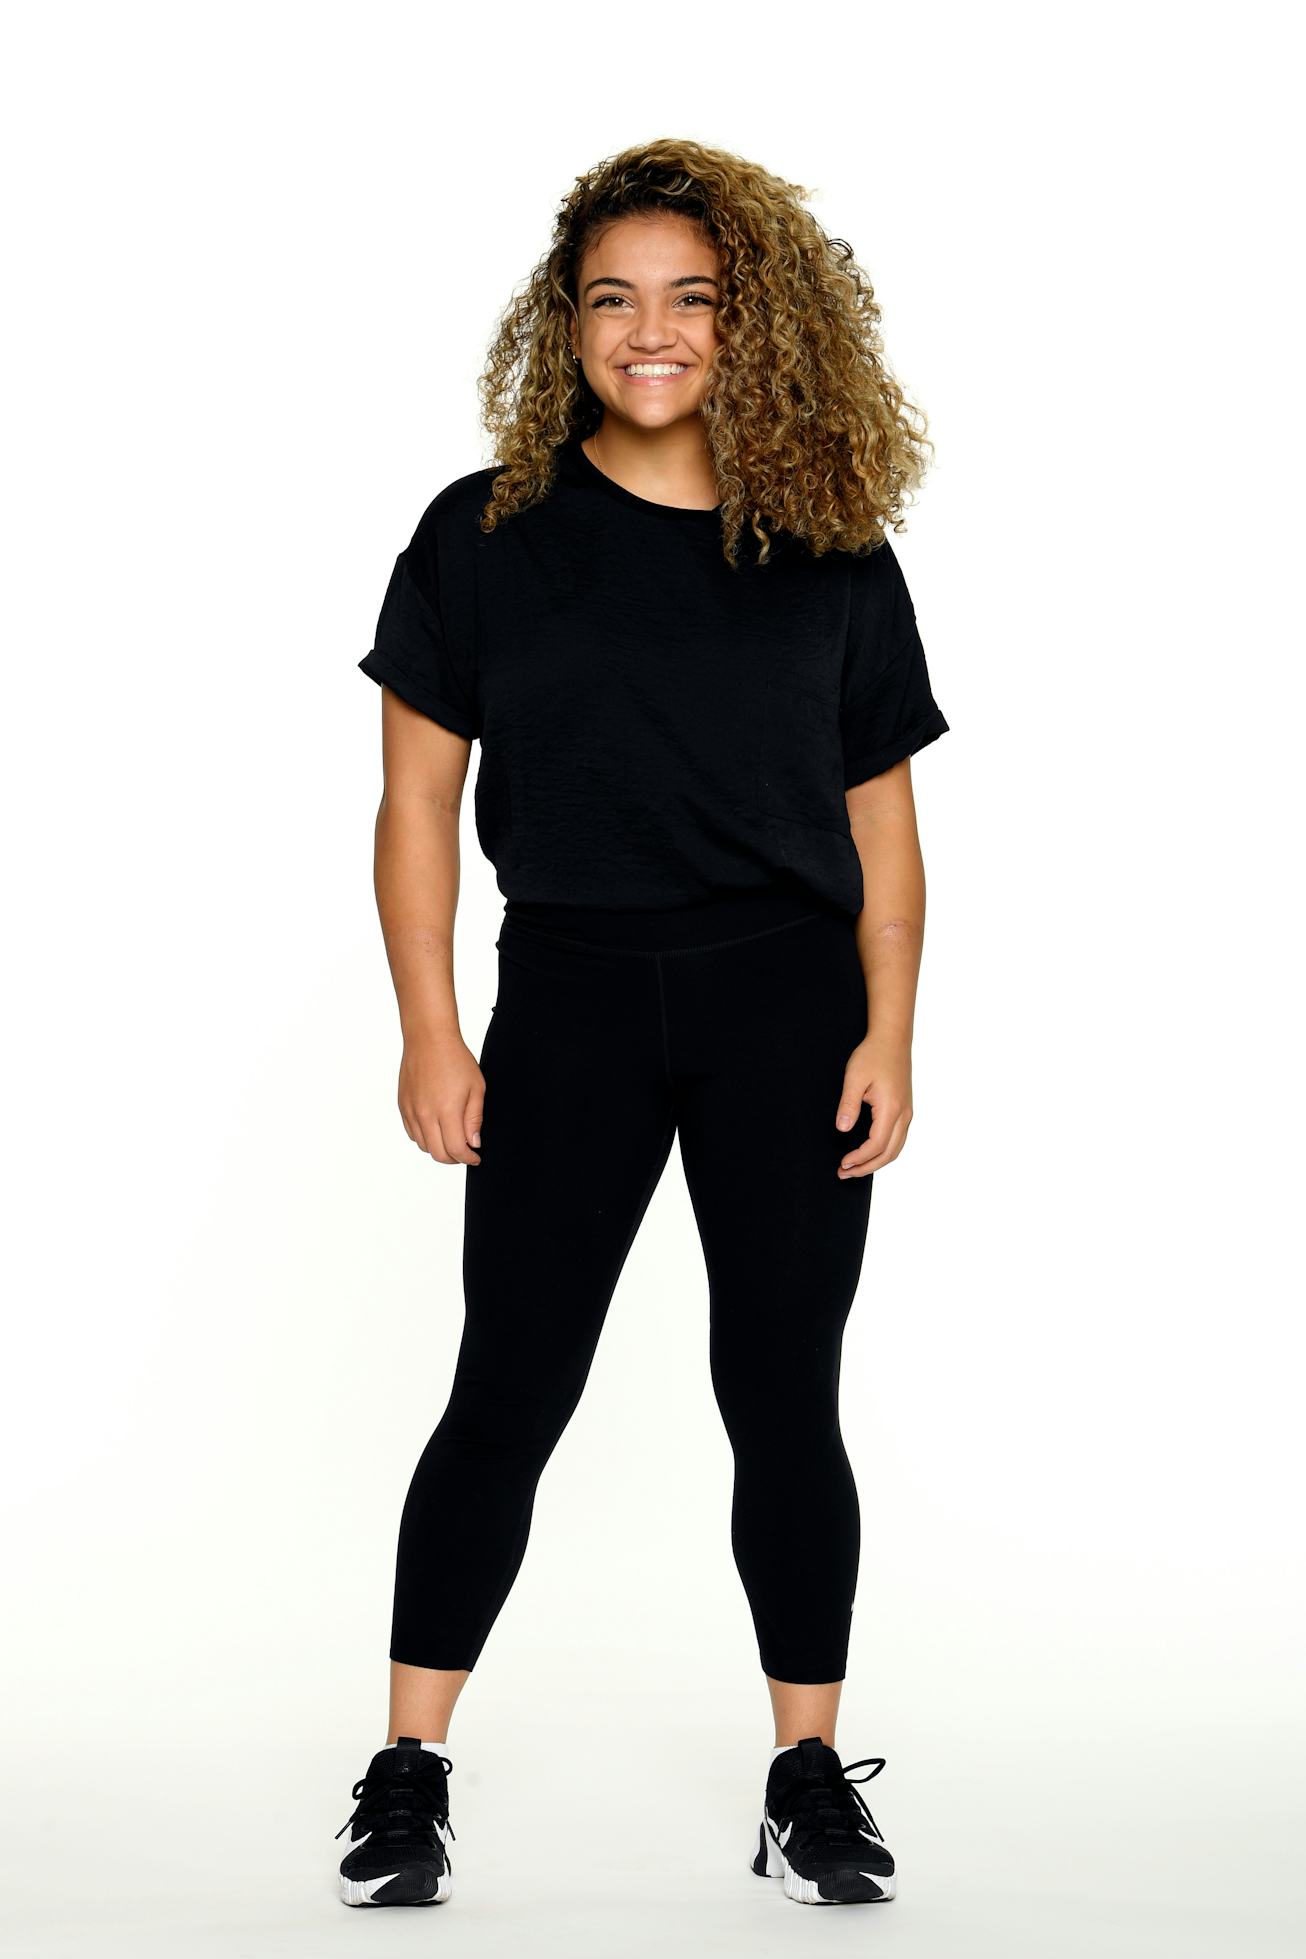 LOS ANGELES, CALIFORNIA - OCTOBER 27: Gymnast Laurie Hernandez poses for a portrait on October 27, 2...